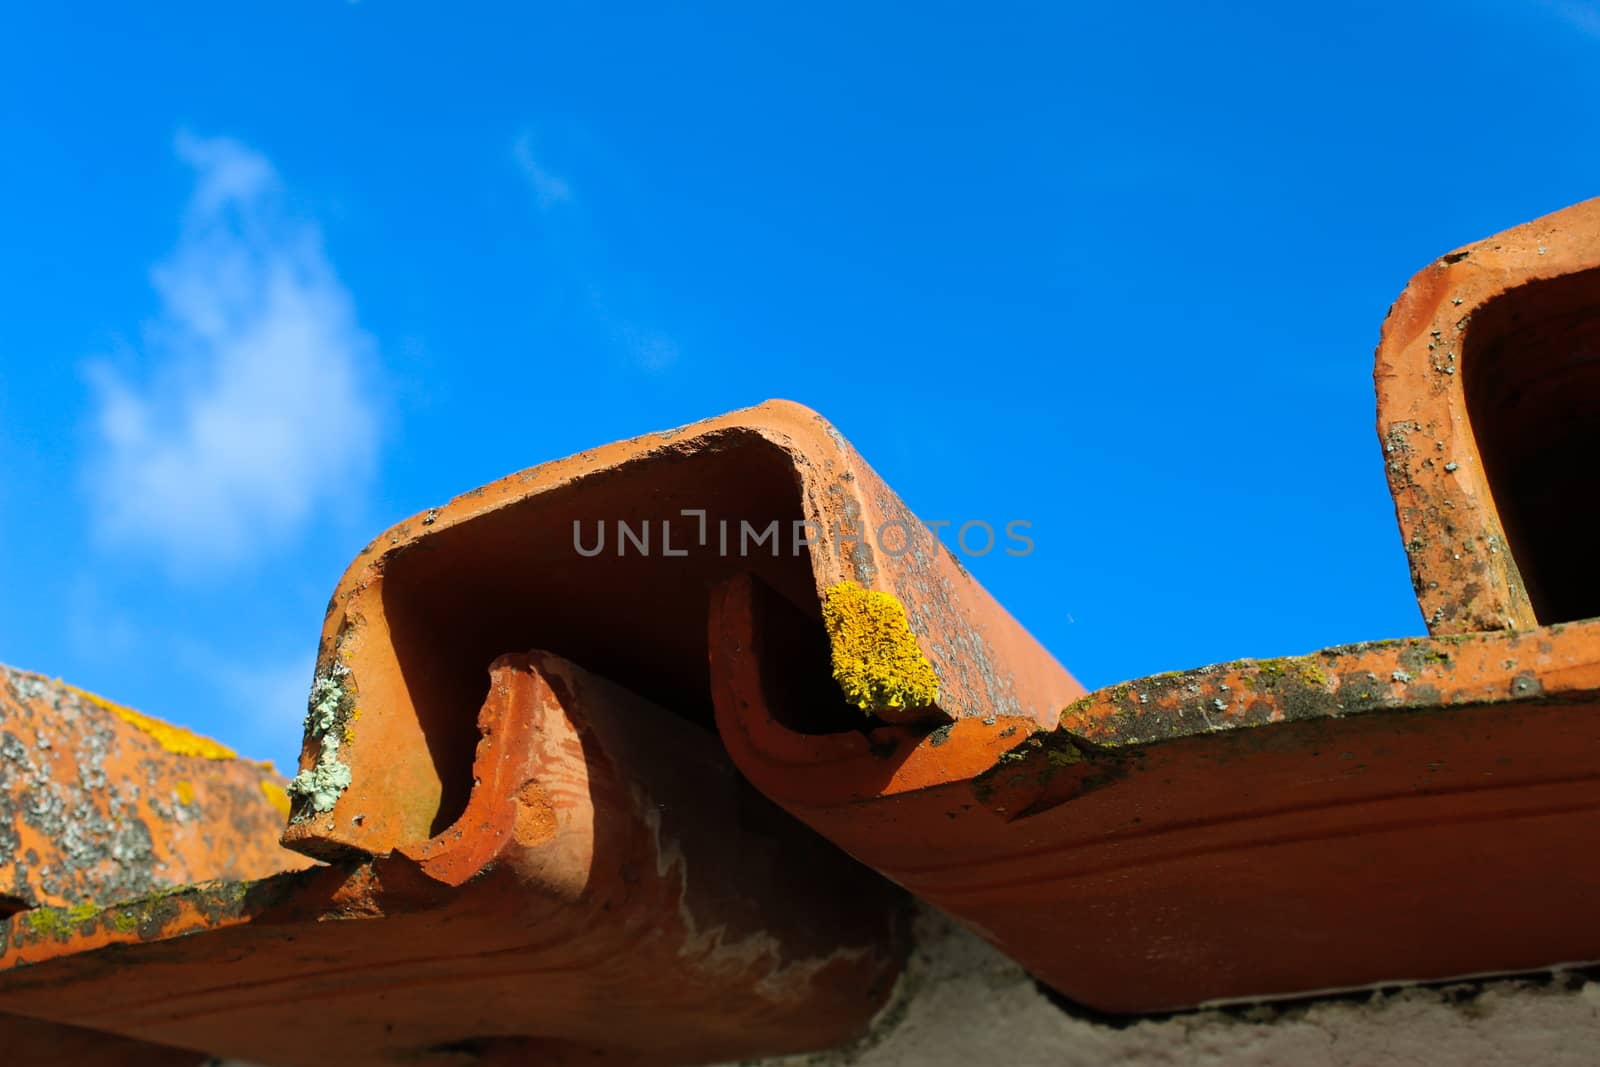 Different lichens on the sunlit roof tile with sky background. Beja, Portugal